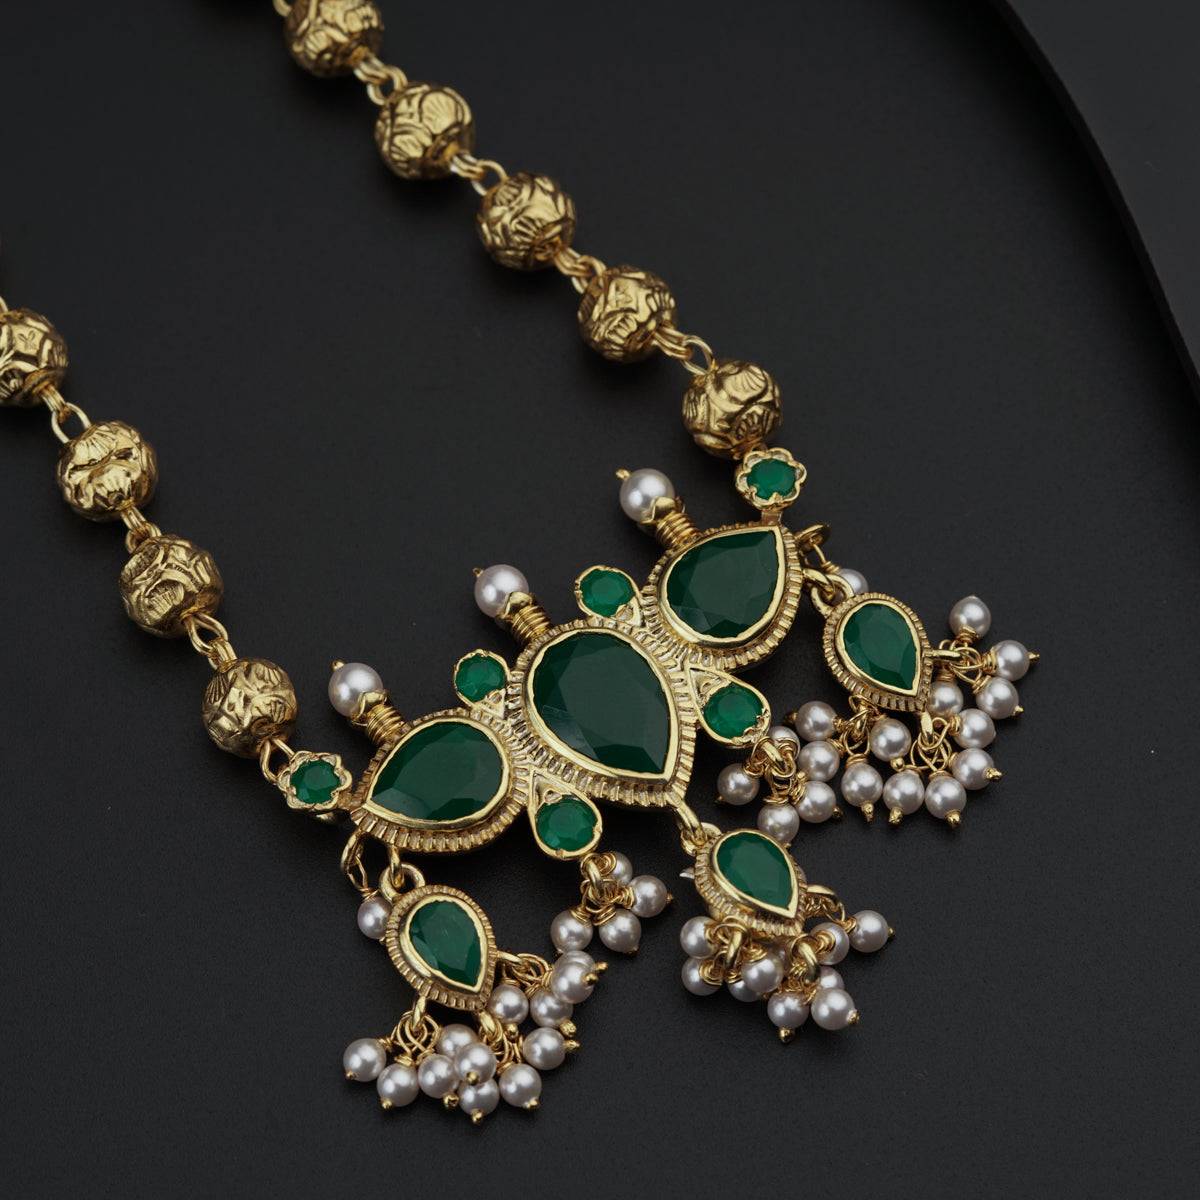 a green and gold necklace with pearls